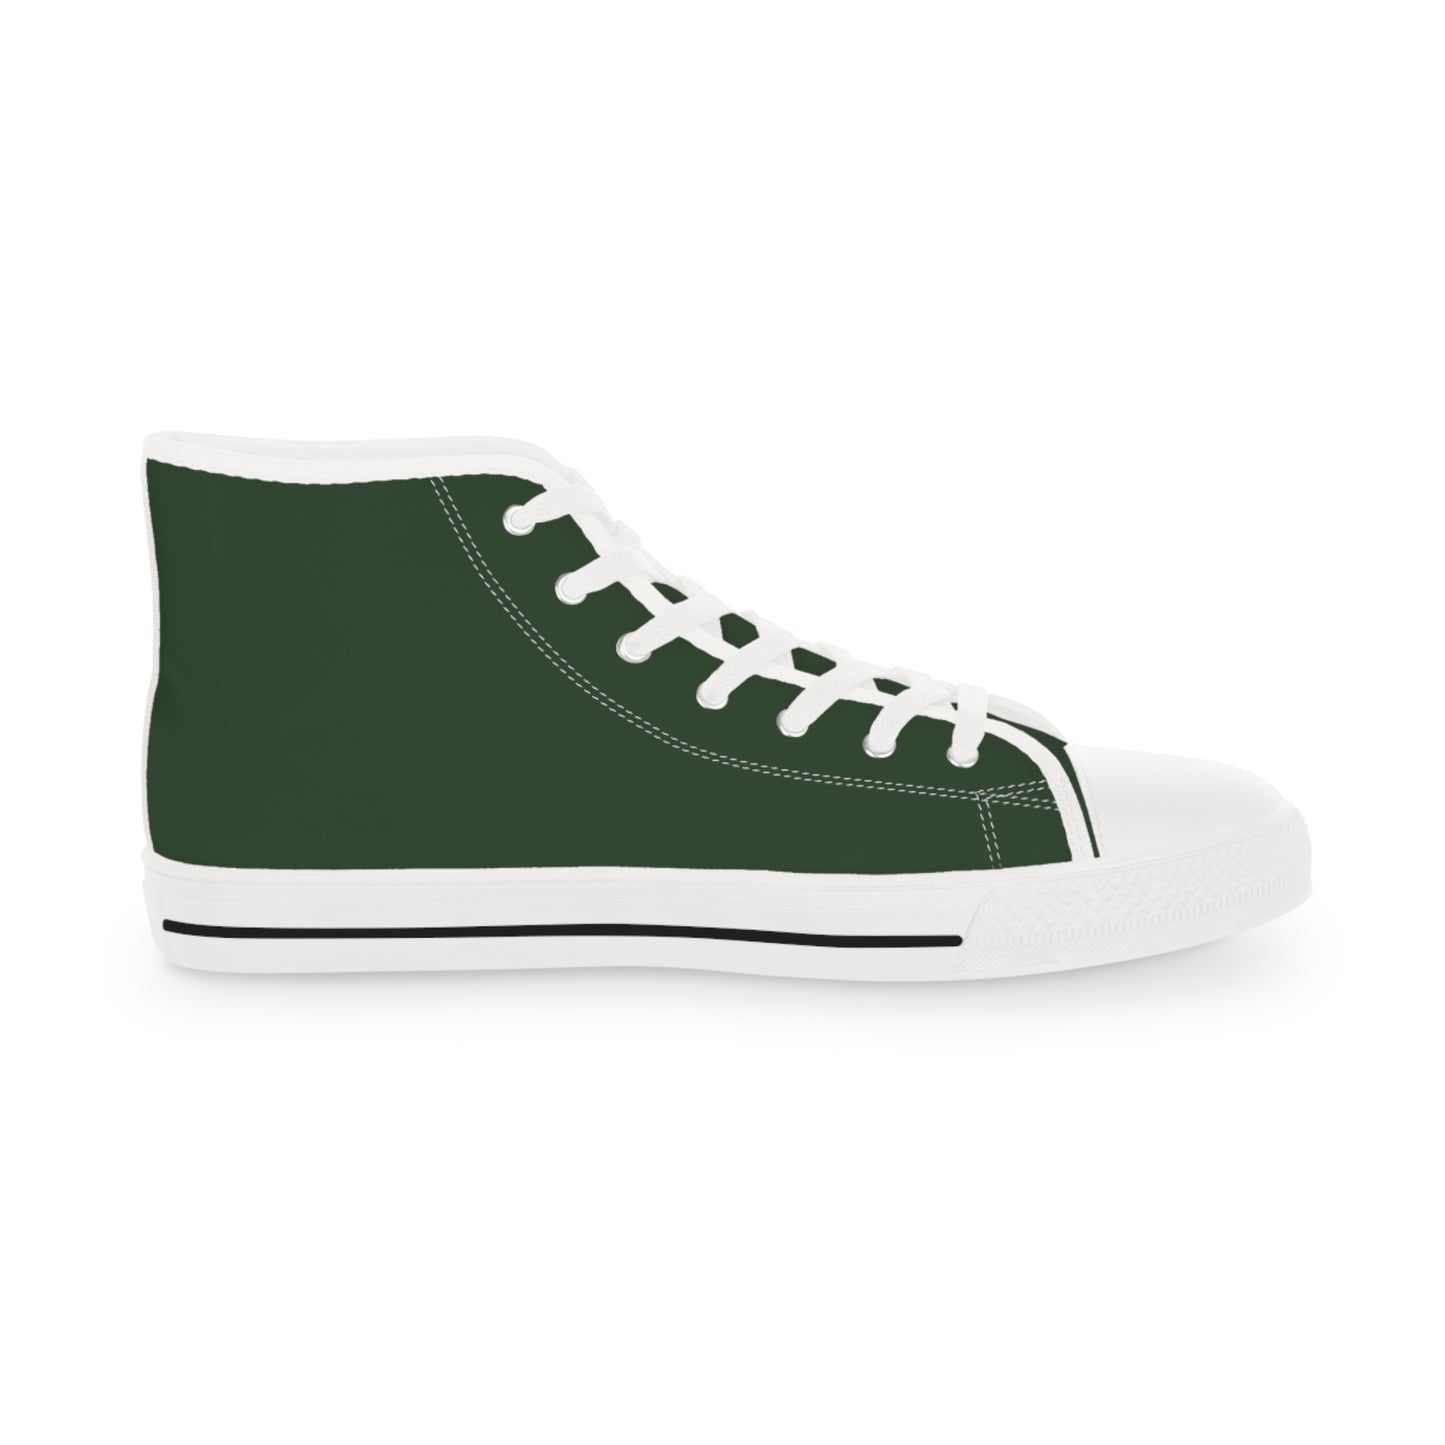 Men's Canvas High Top Solid Color Sneakers - Hunter Green US 14 White sole